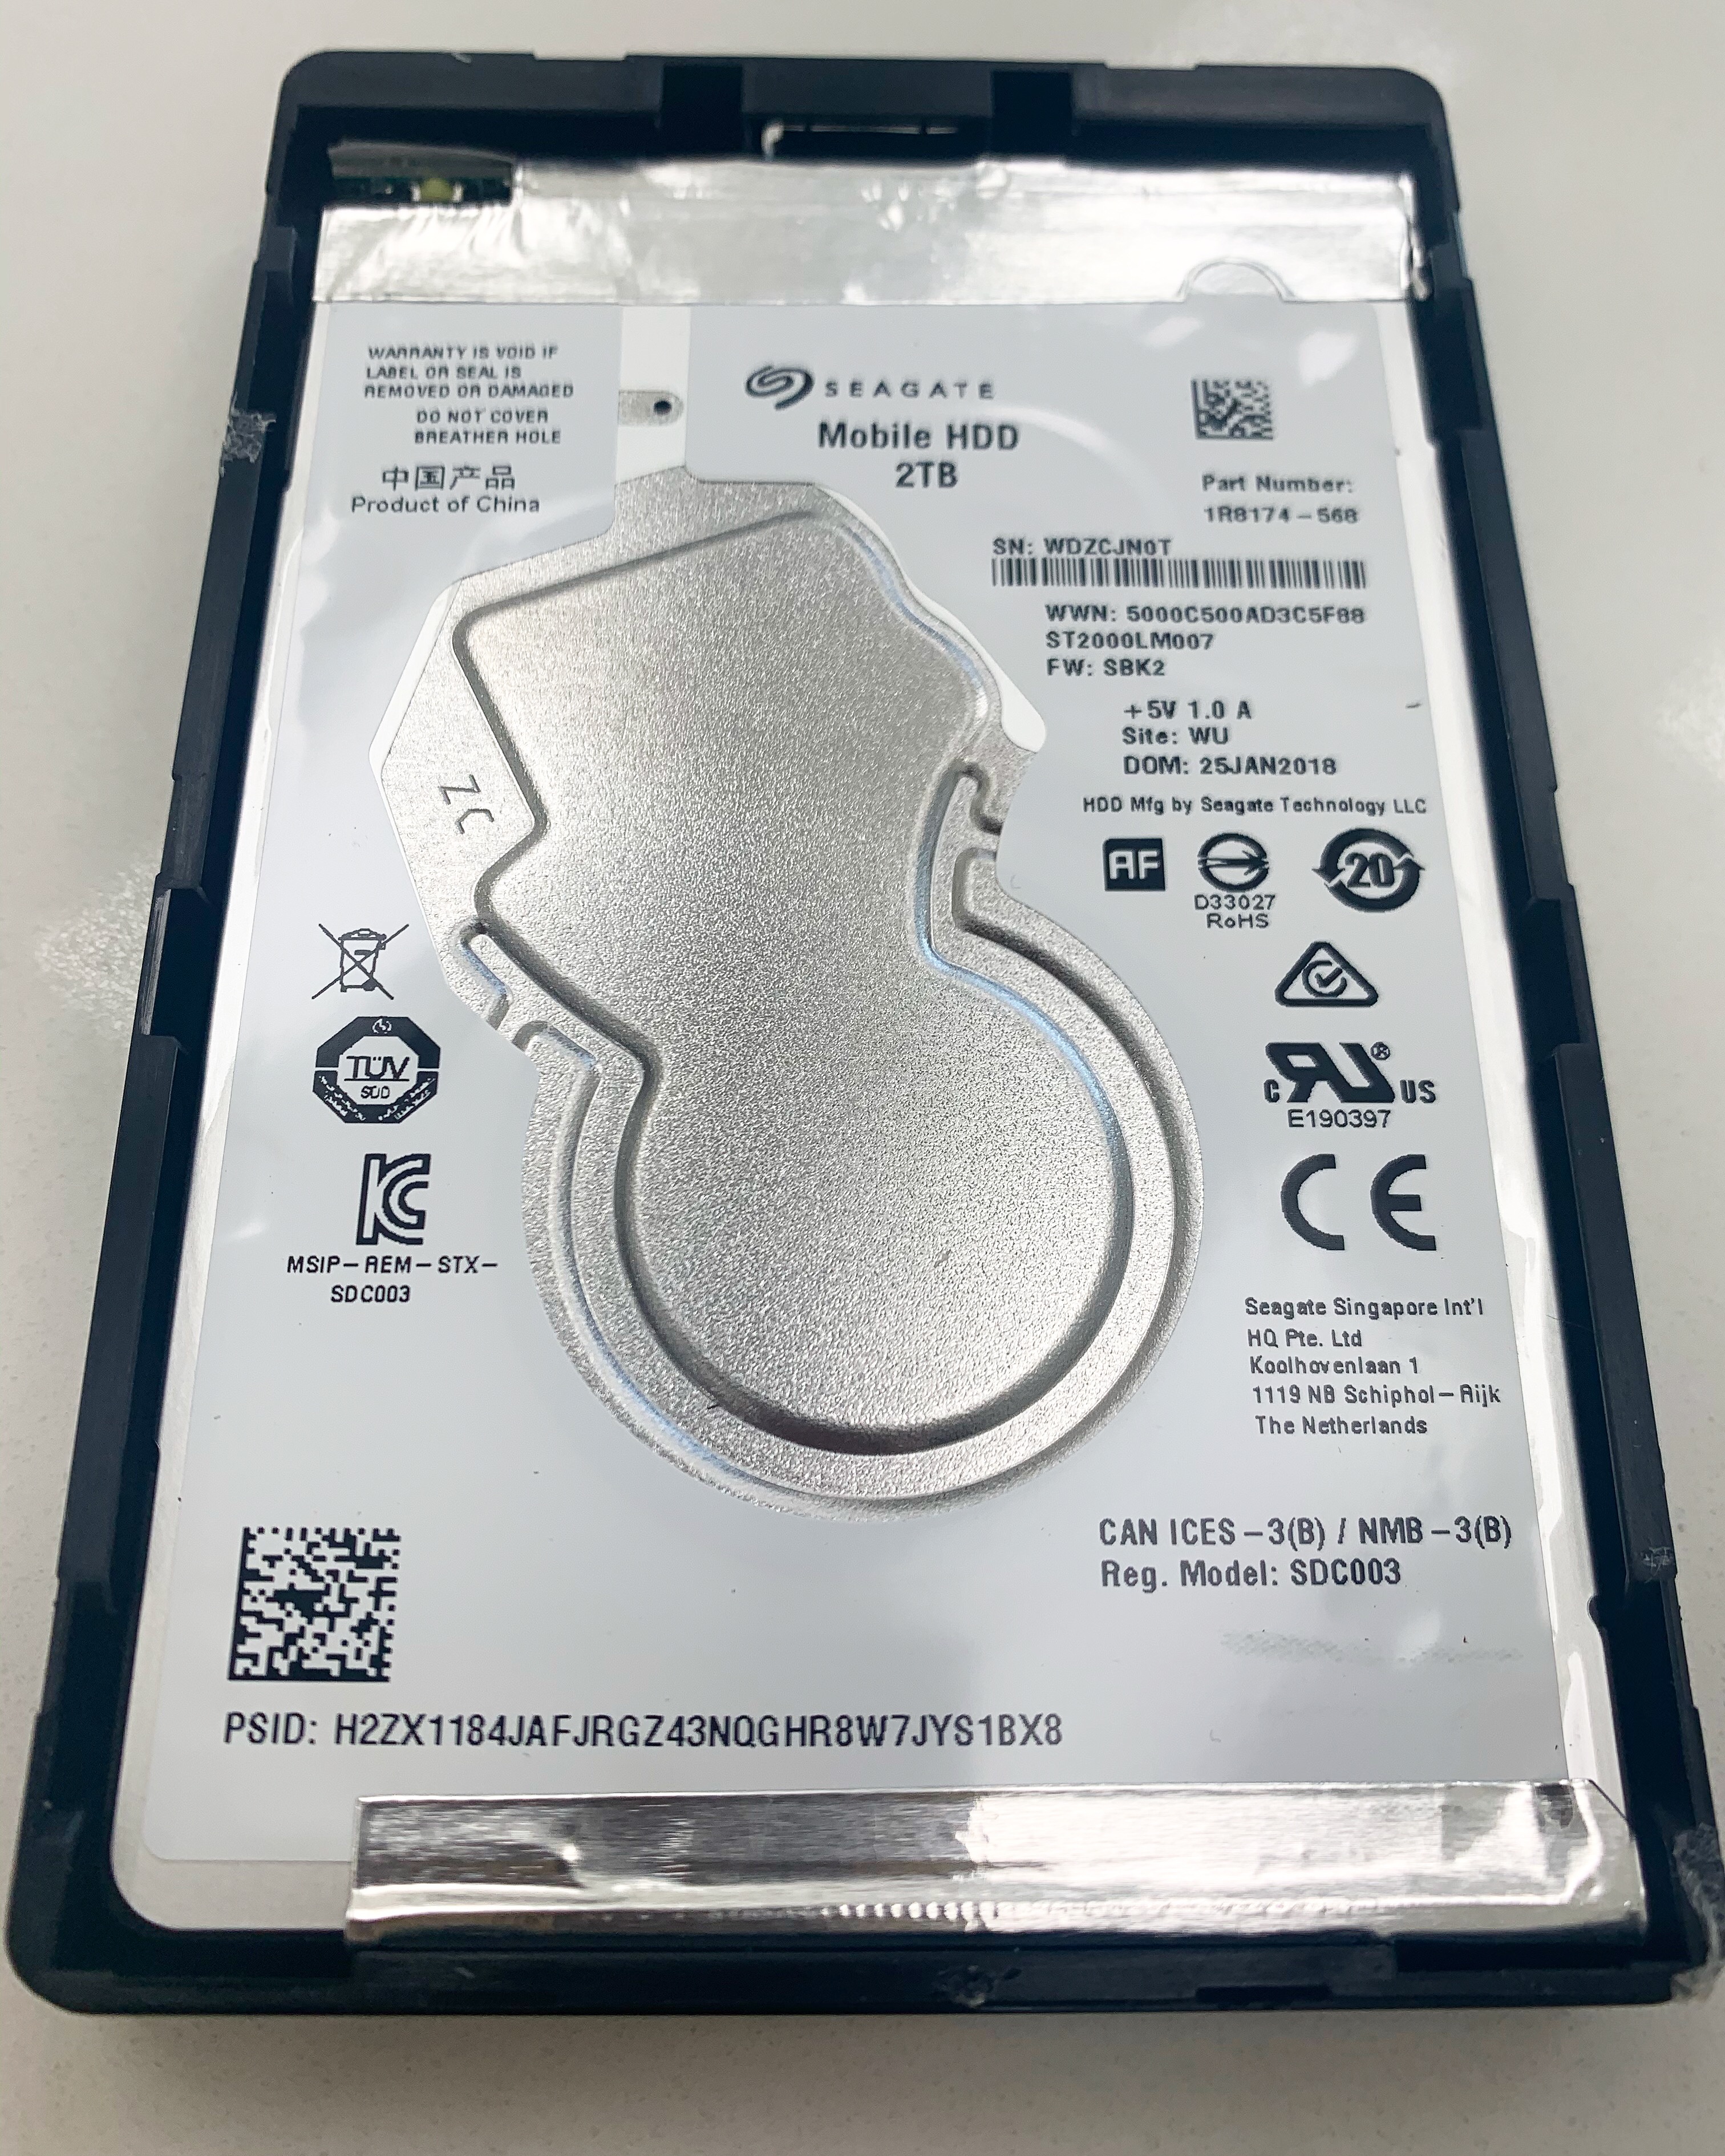 Seagate Data Recovery (ST2000LM007) - Five Star Data Recovery